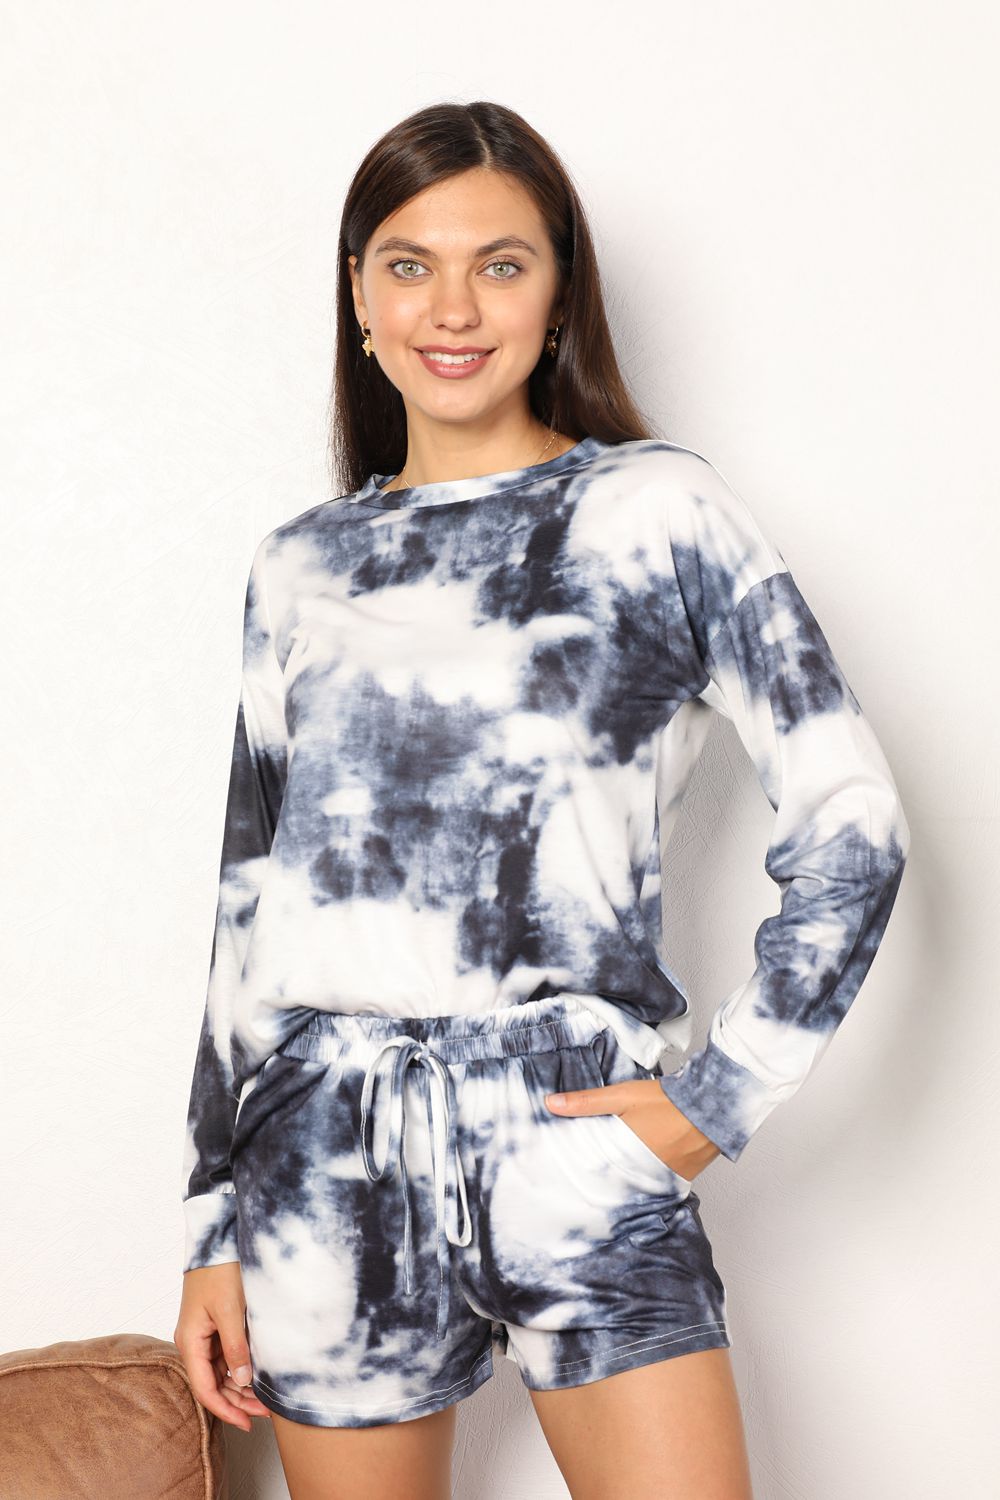 Double Take Tie-Dye Round Neck Top and Shorts Lounge Set BLUE ZONE PLANET